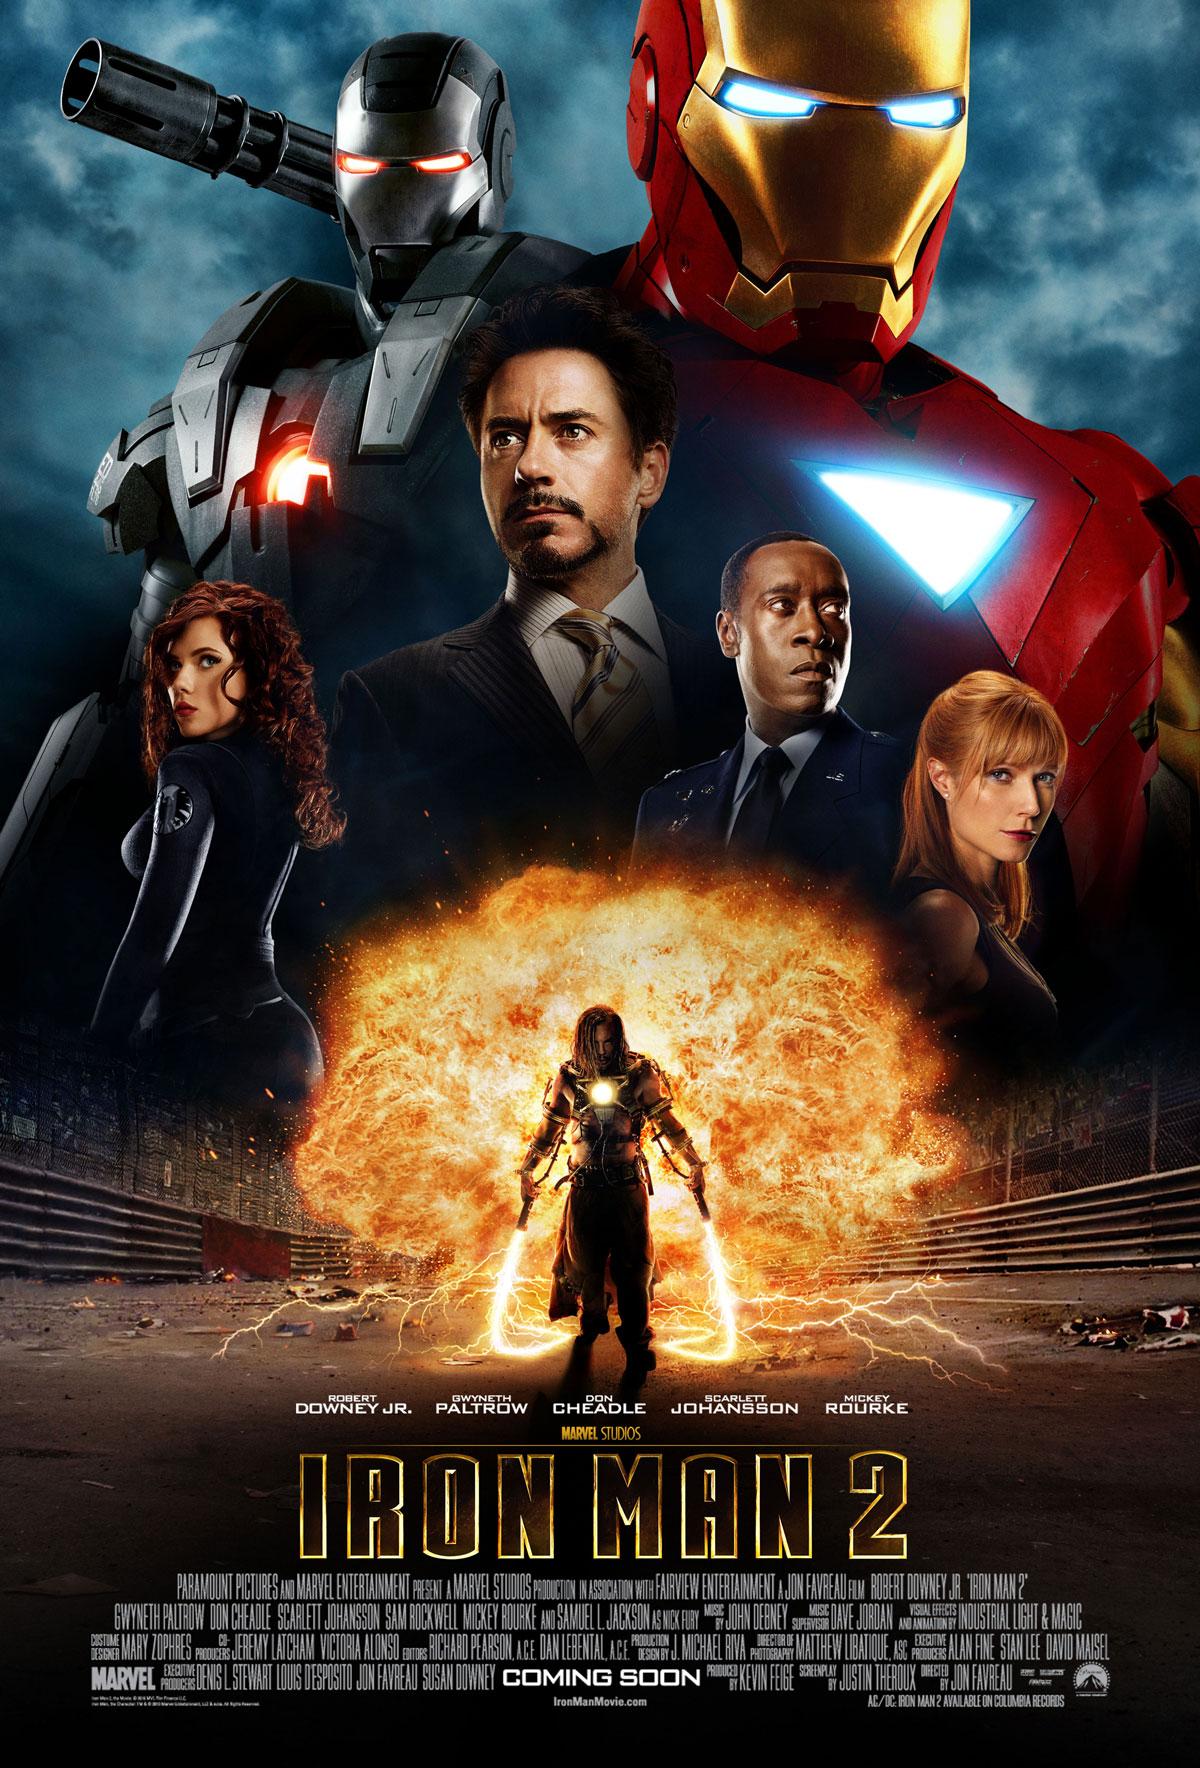 Iron Man 2 (May 7, 2010) - Return to the world of Iron Man as Tony Stark faces new challenges, new foes, and unveils even more technological marvels in this action-packed sequel.